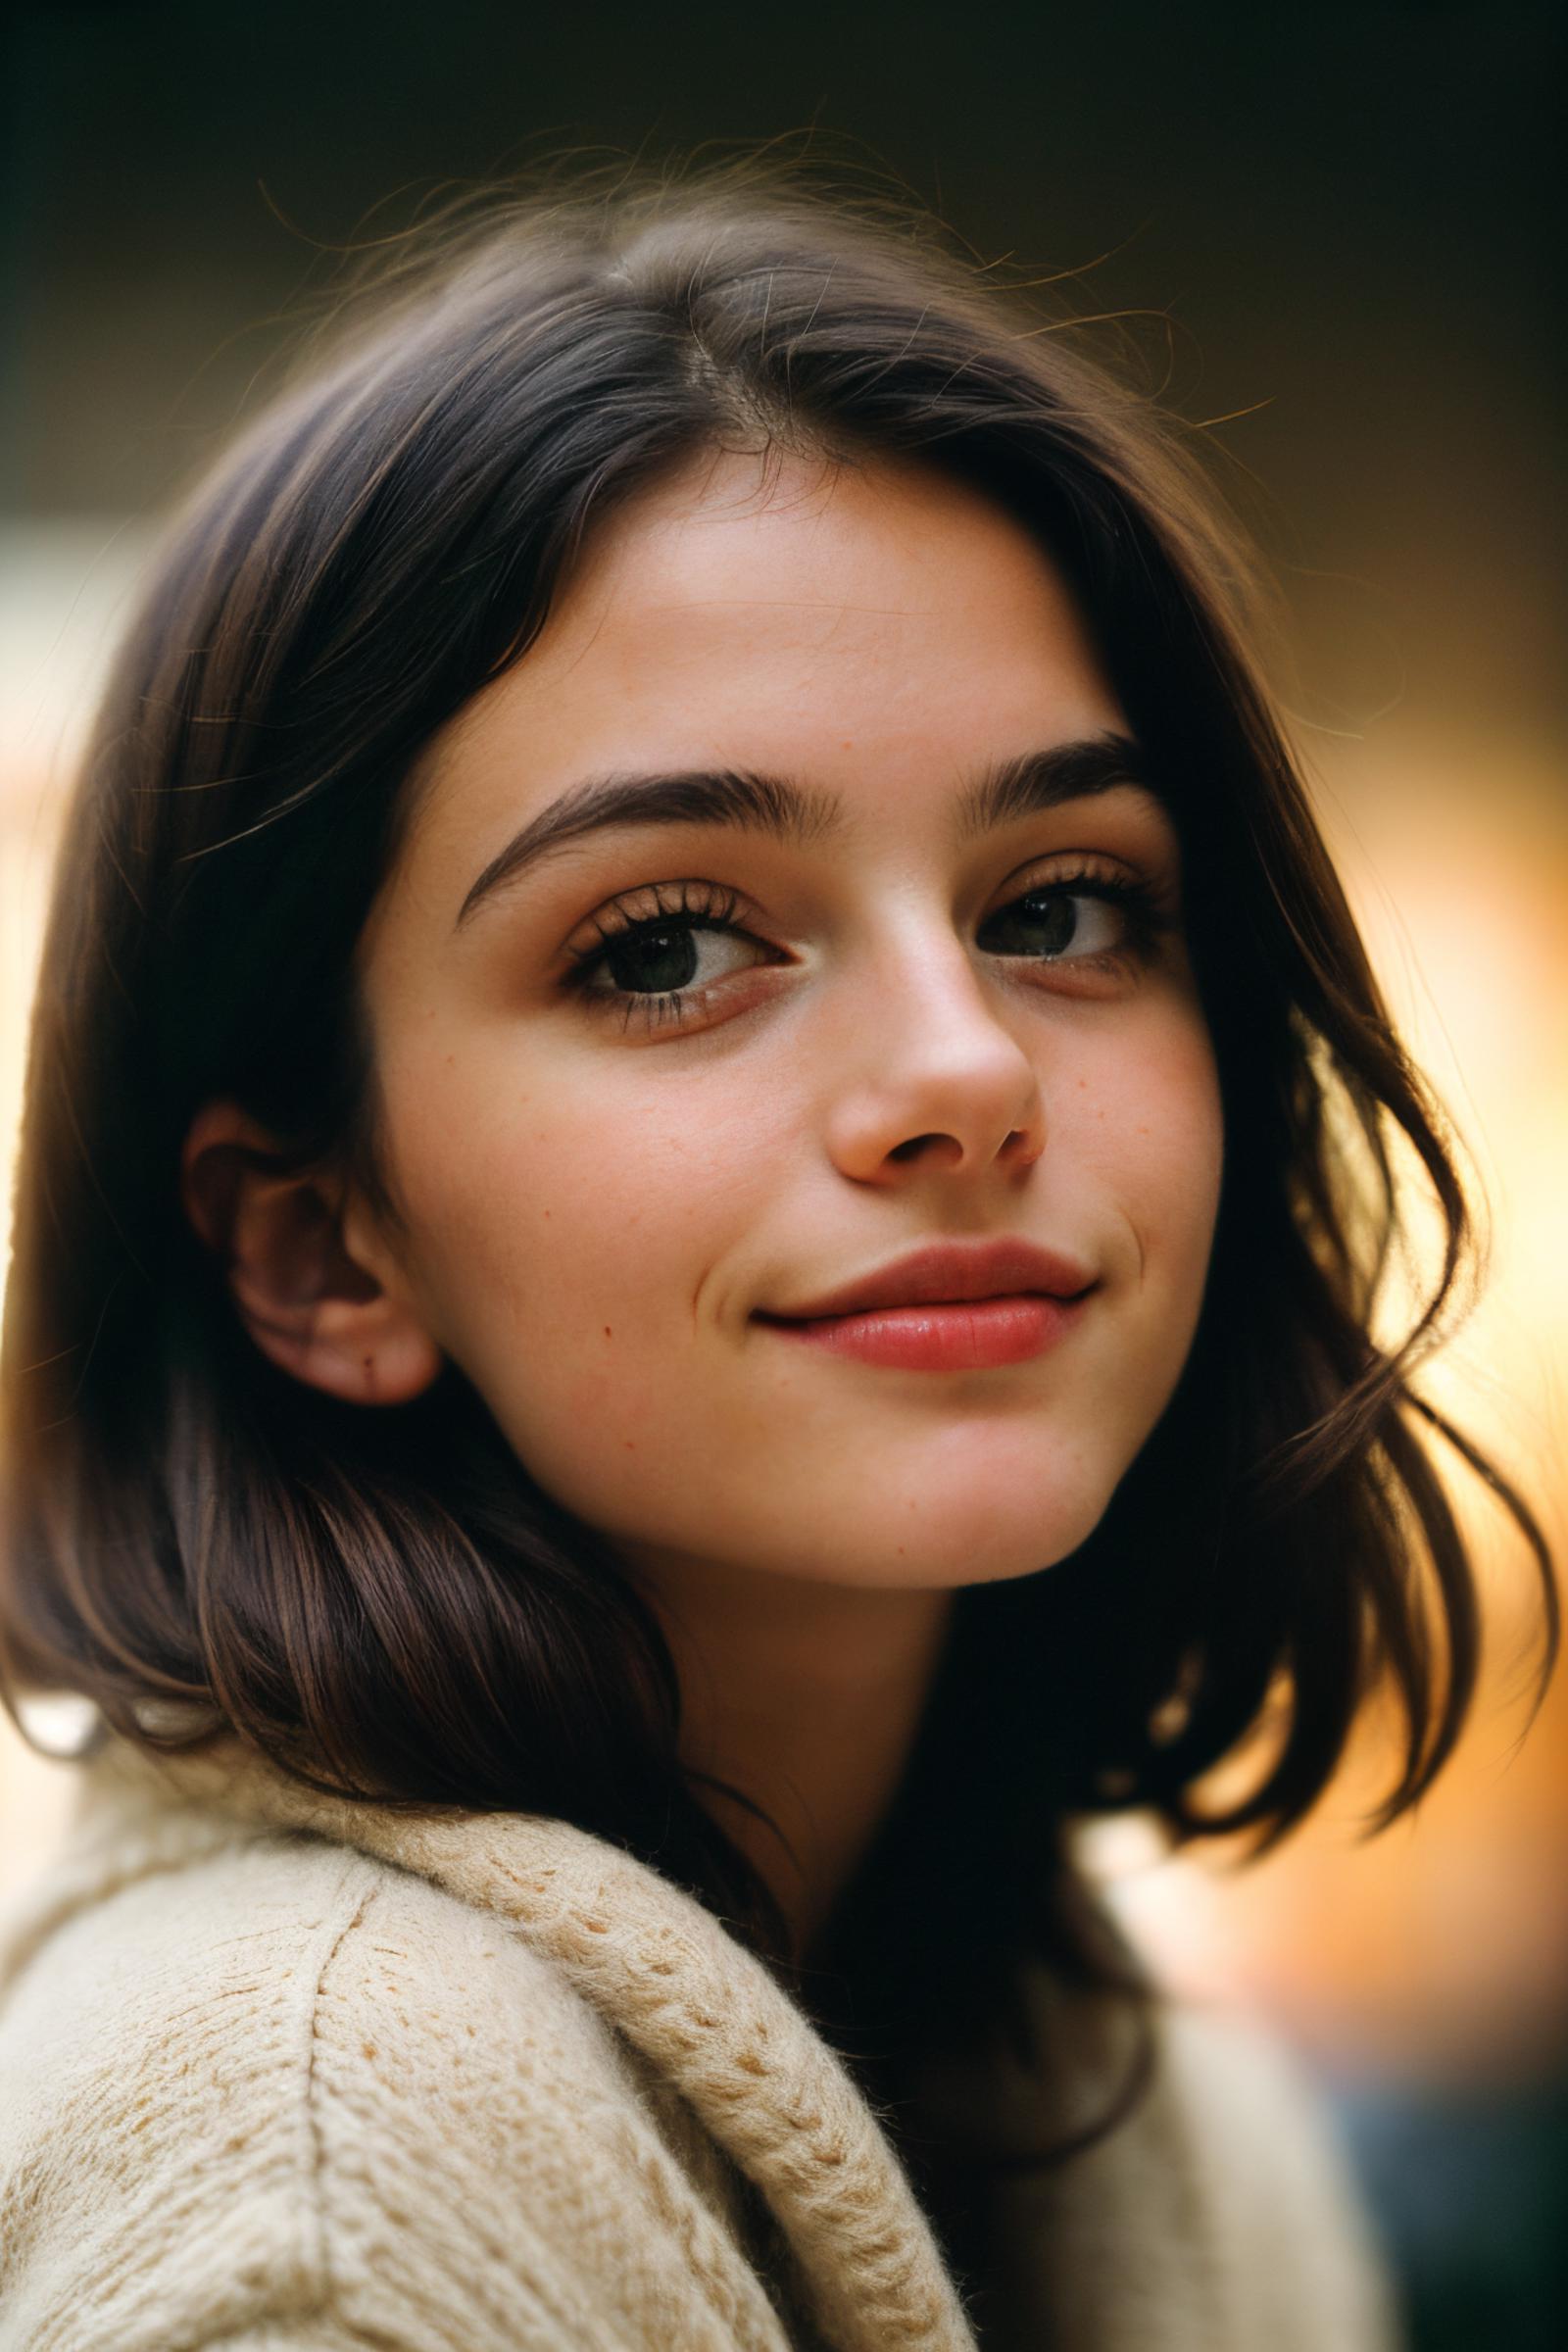 A smiling young woman with brown hair and a white sweater.